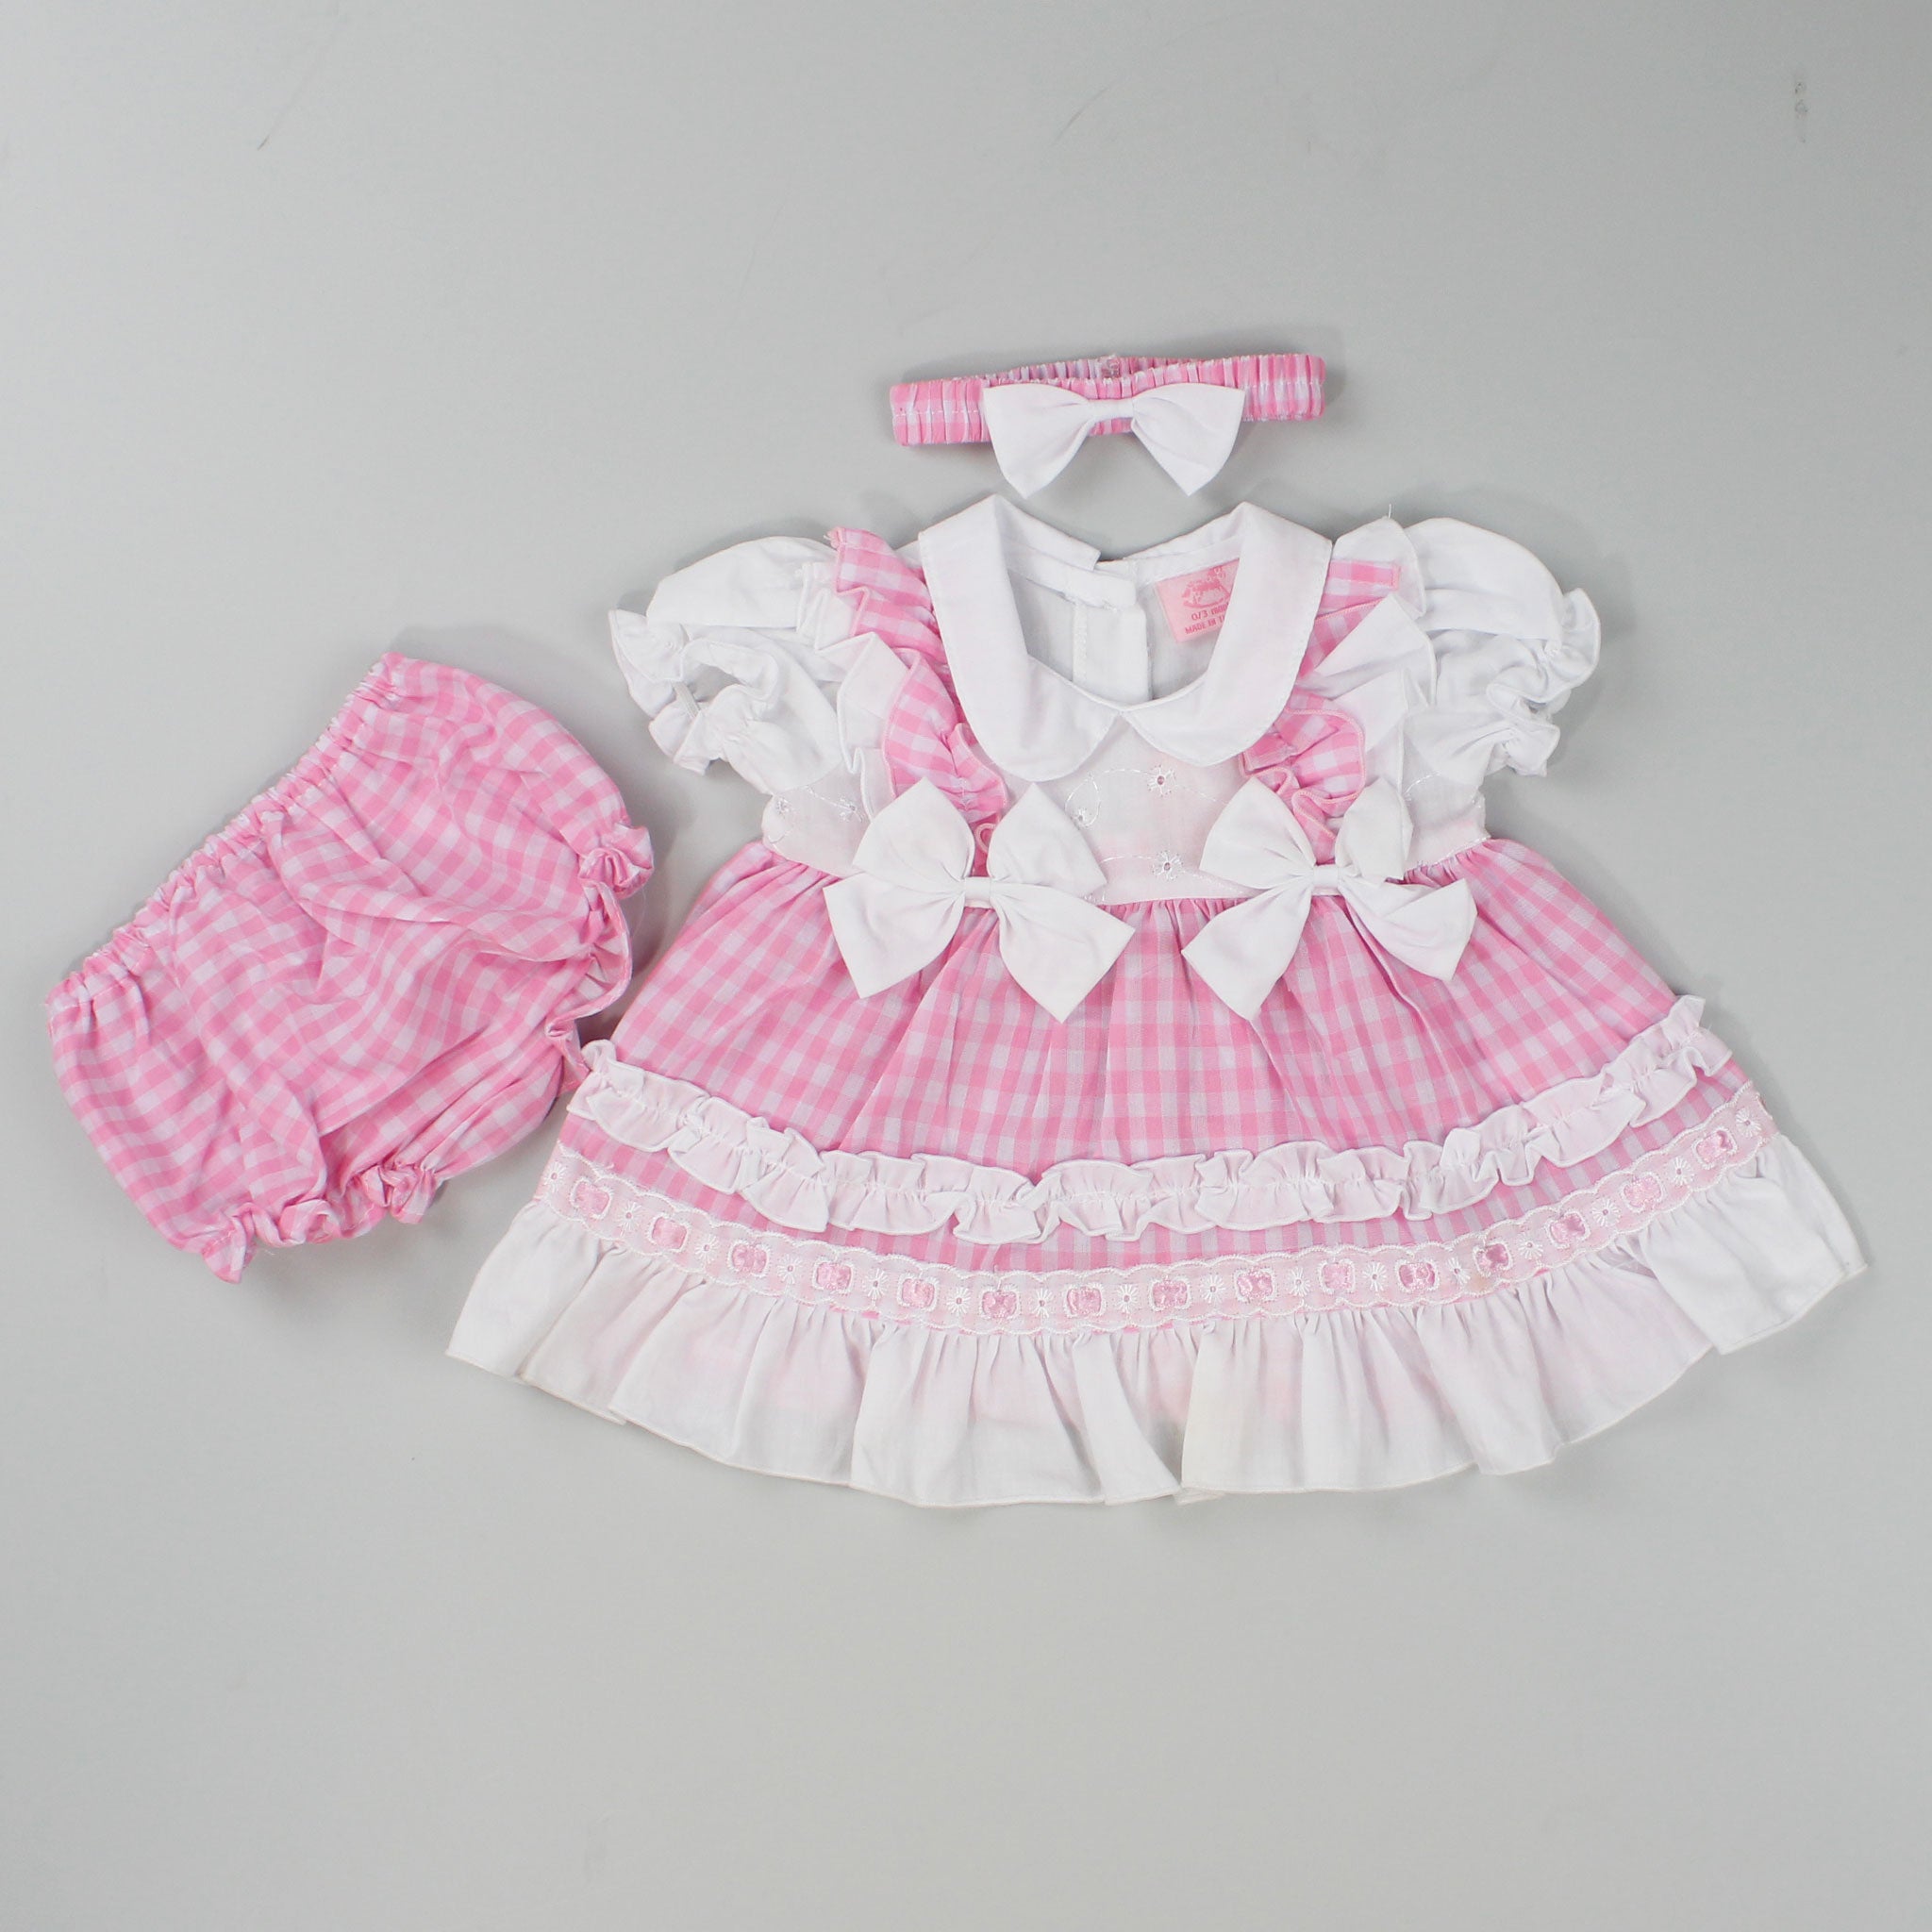 Baby Girls Summer Outfit- Dress with knickers and headband